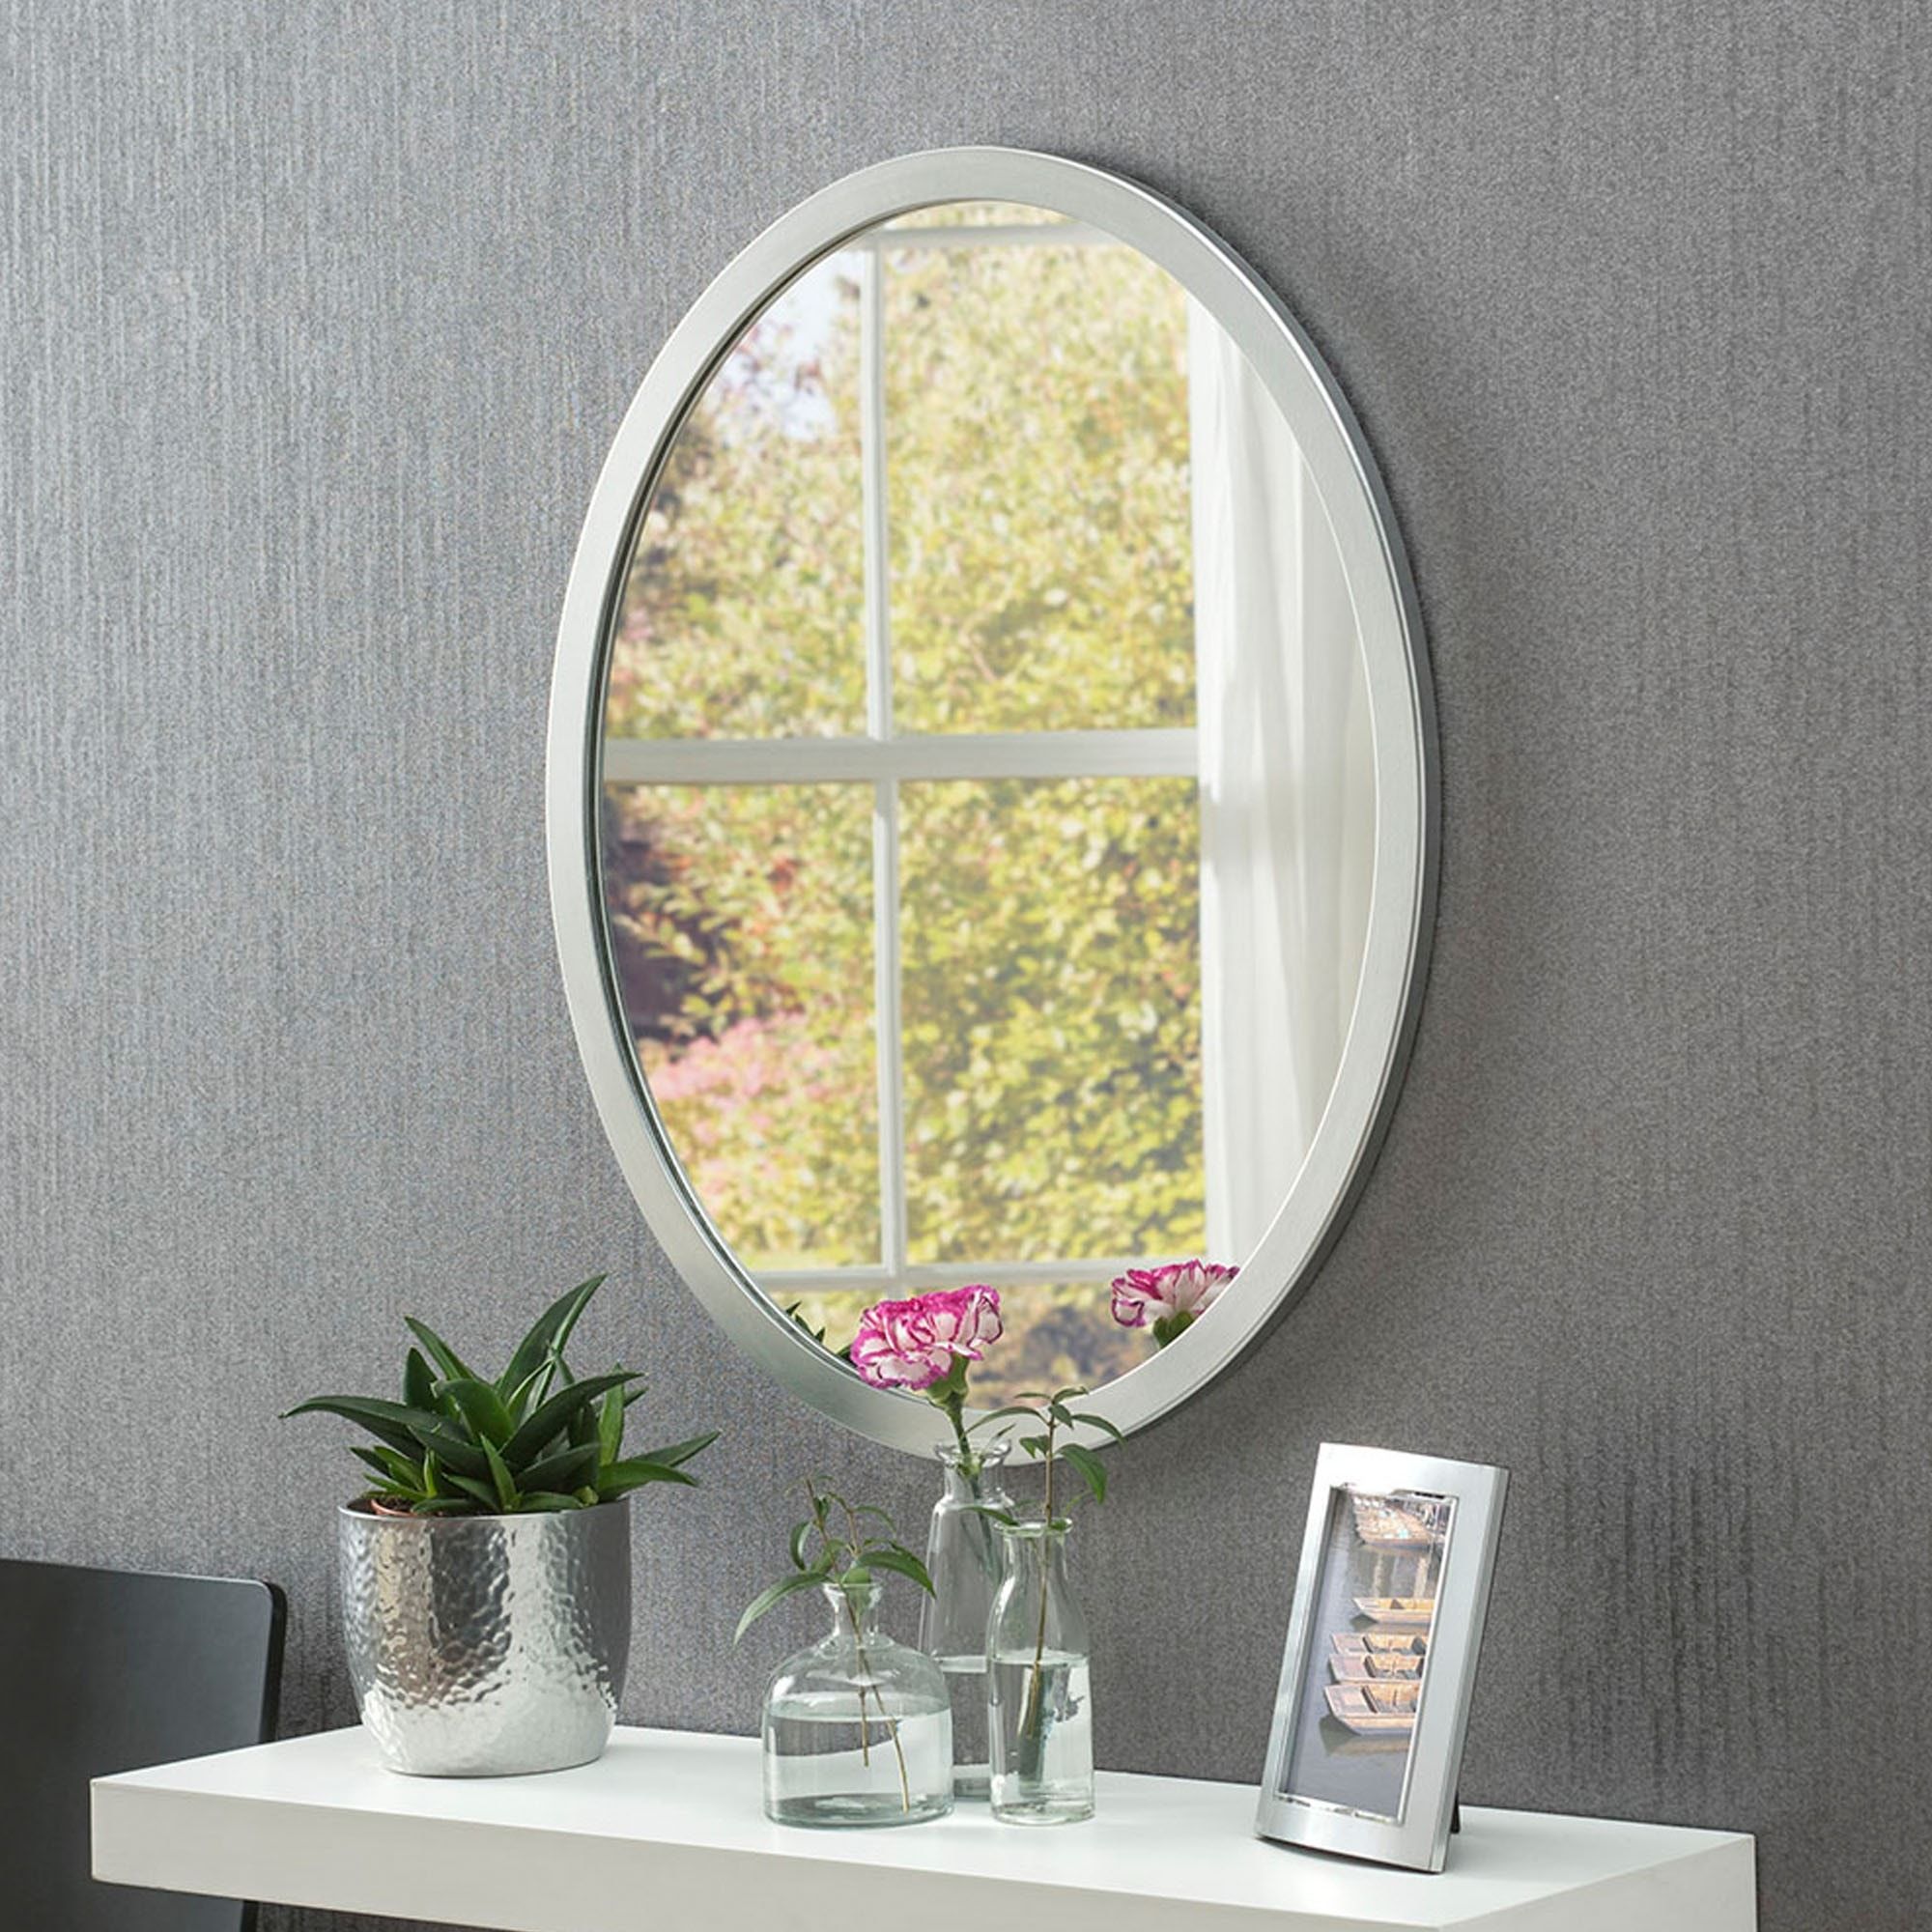 Classic Oval Silver Wall Mirror | Wall Mirrors Within Silver Asymmetrical Wall Mirrors (View 14 of 15)